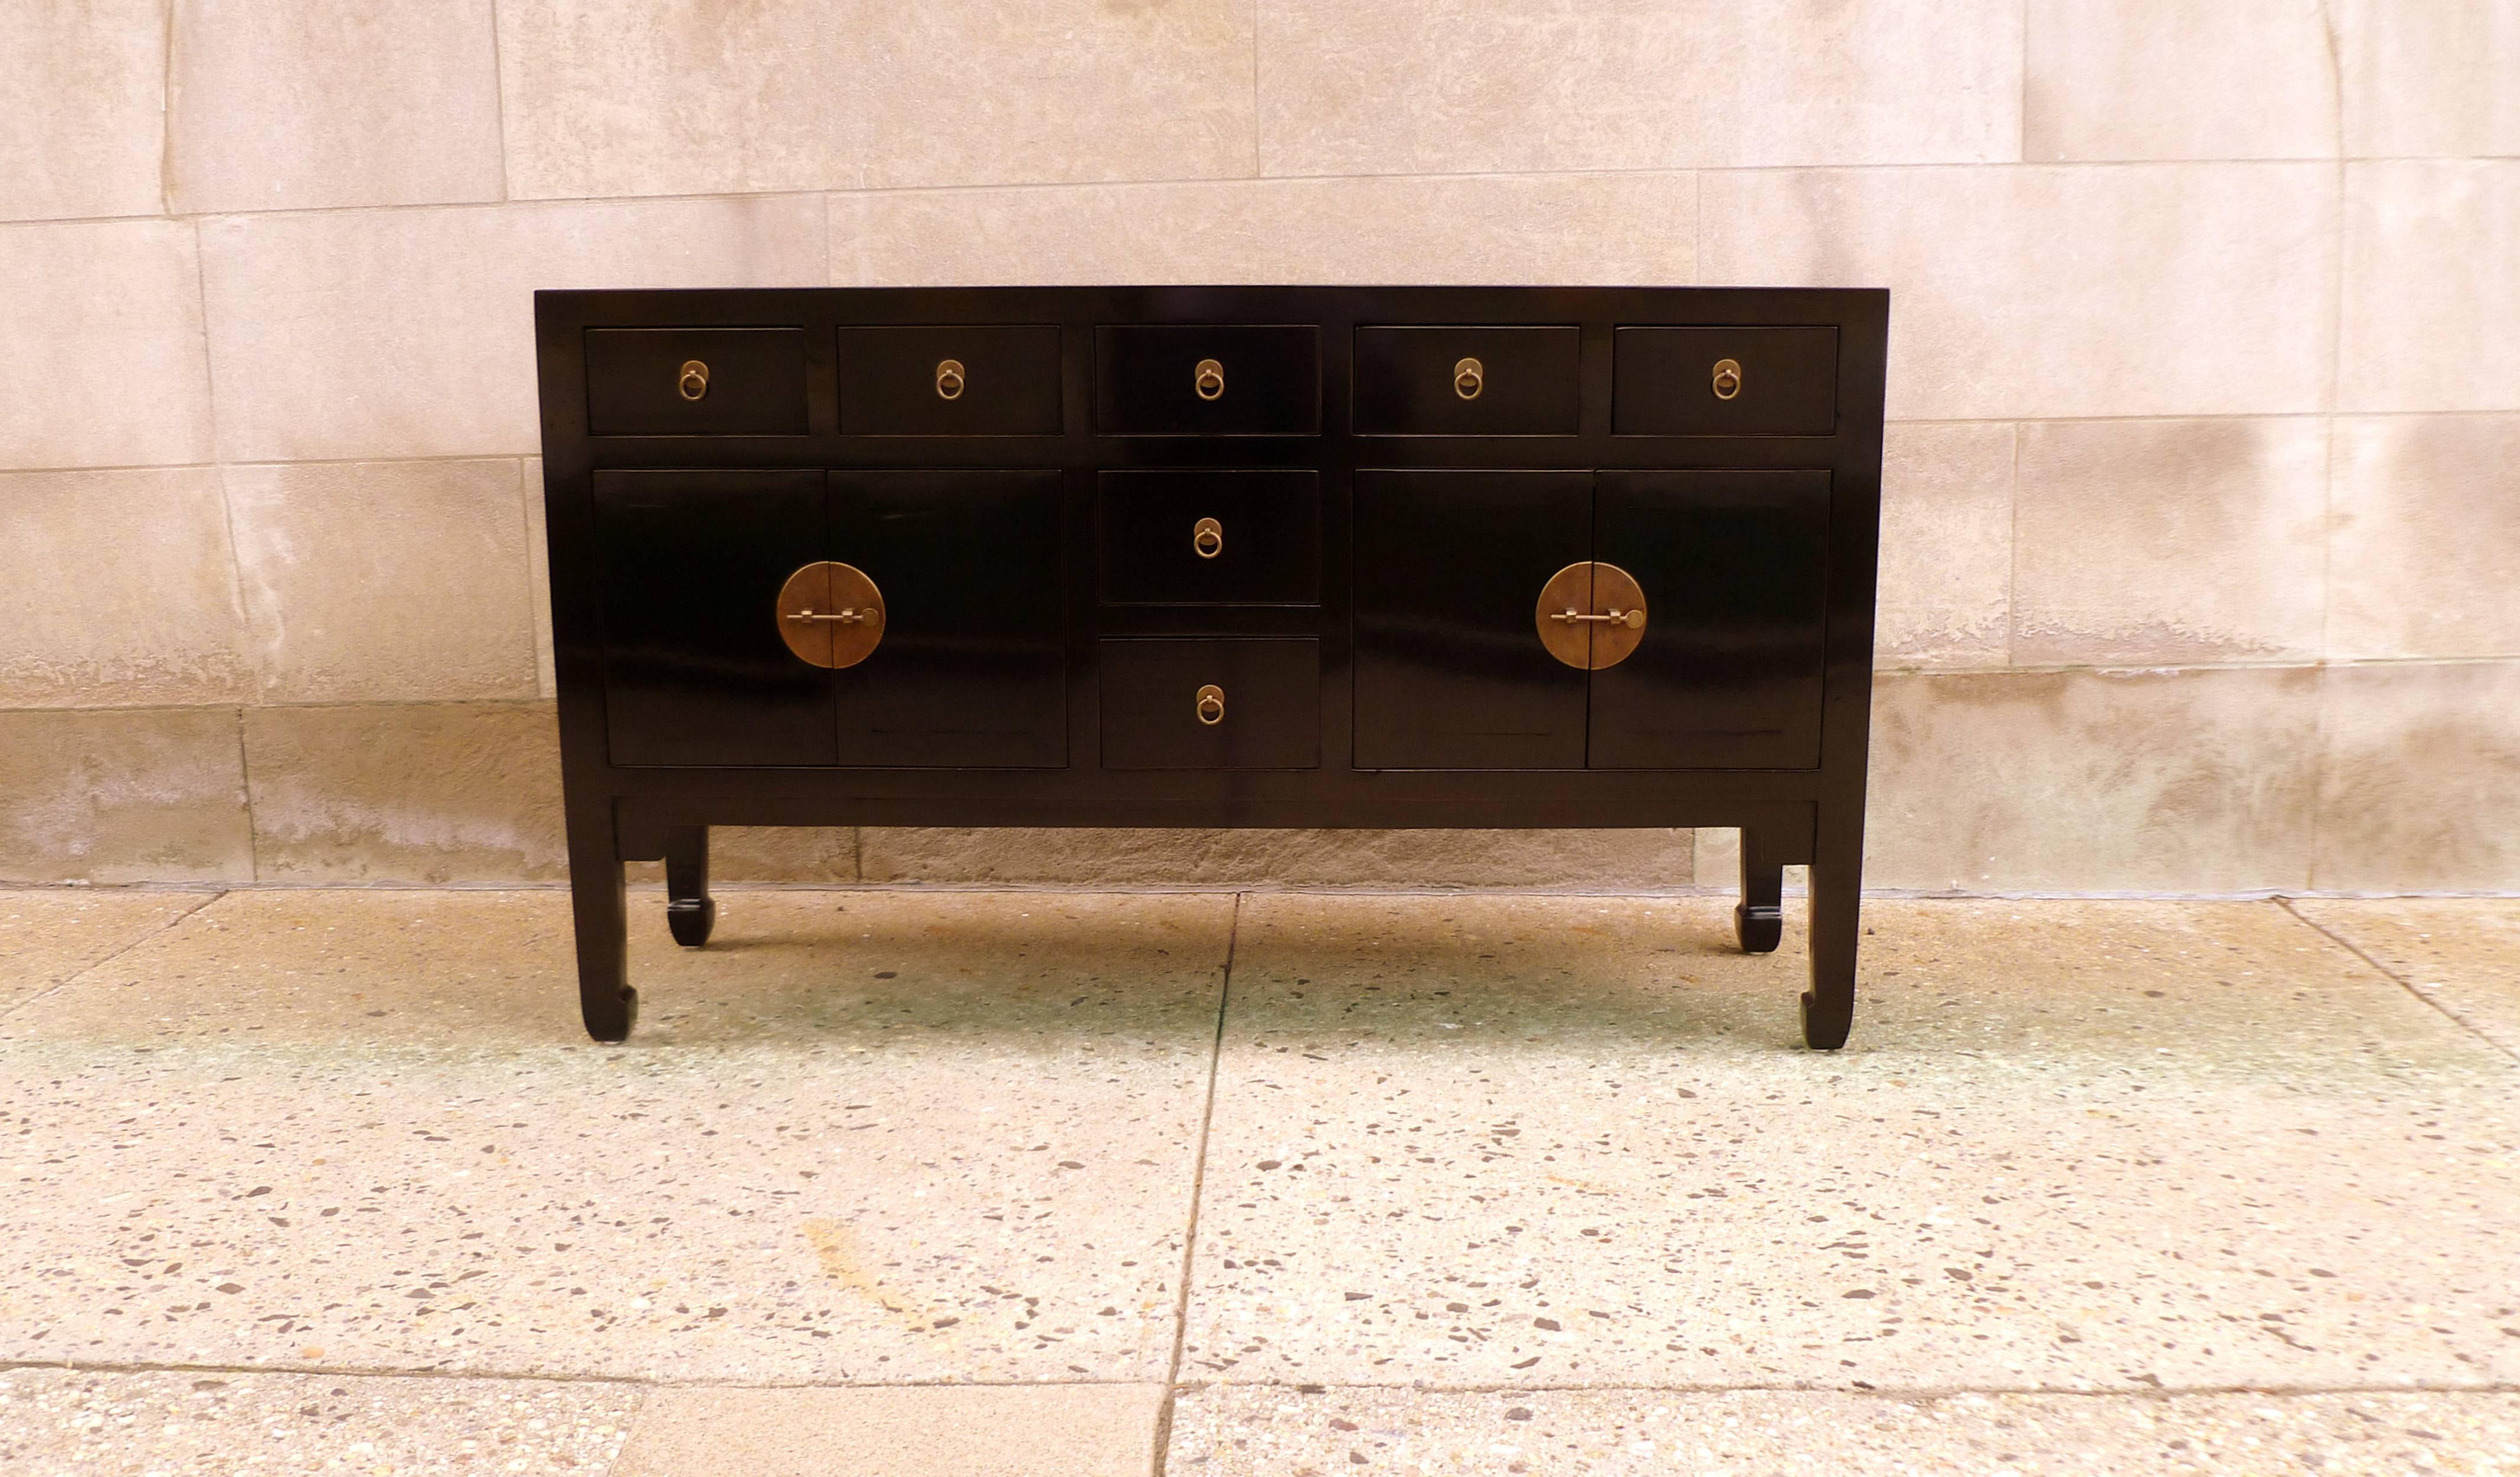 Fine black lacquer sideboard with drawers. Very elegant, simple form, beautiful color.